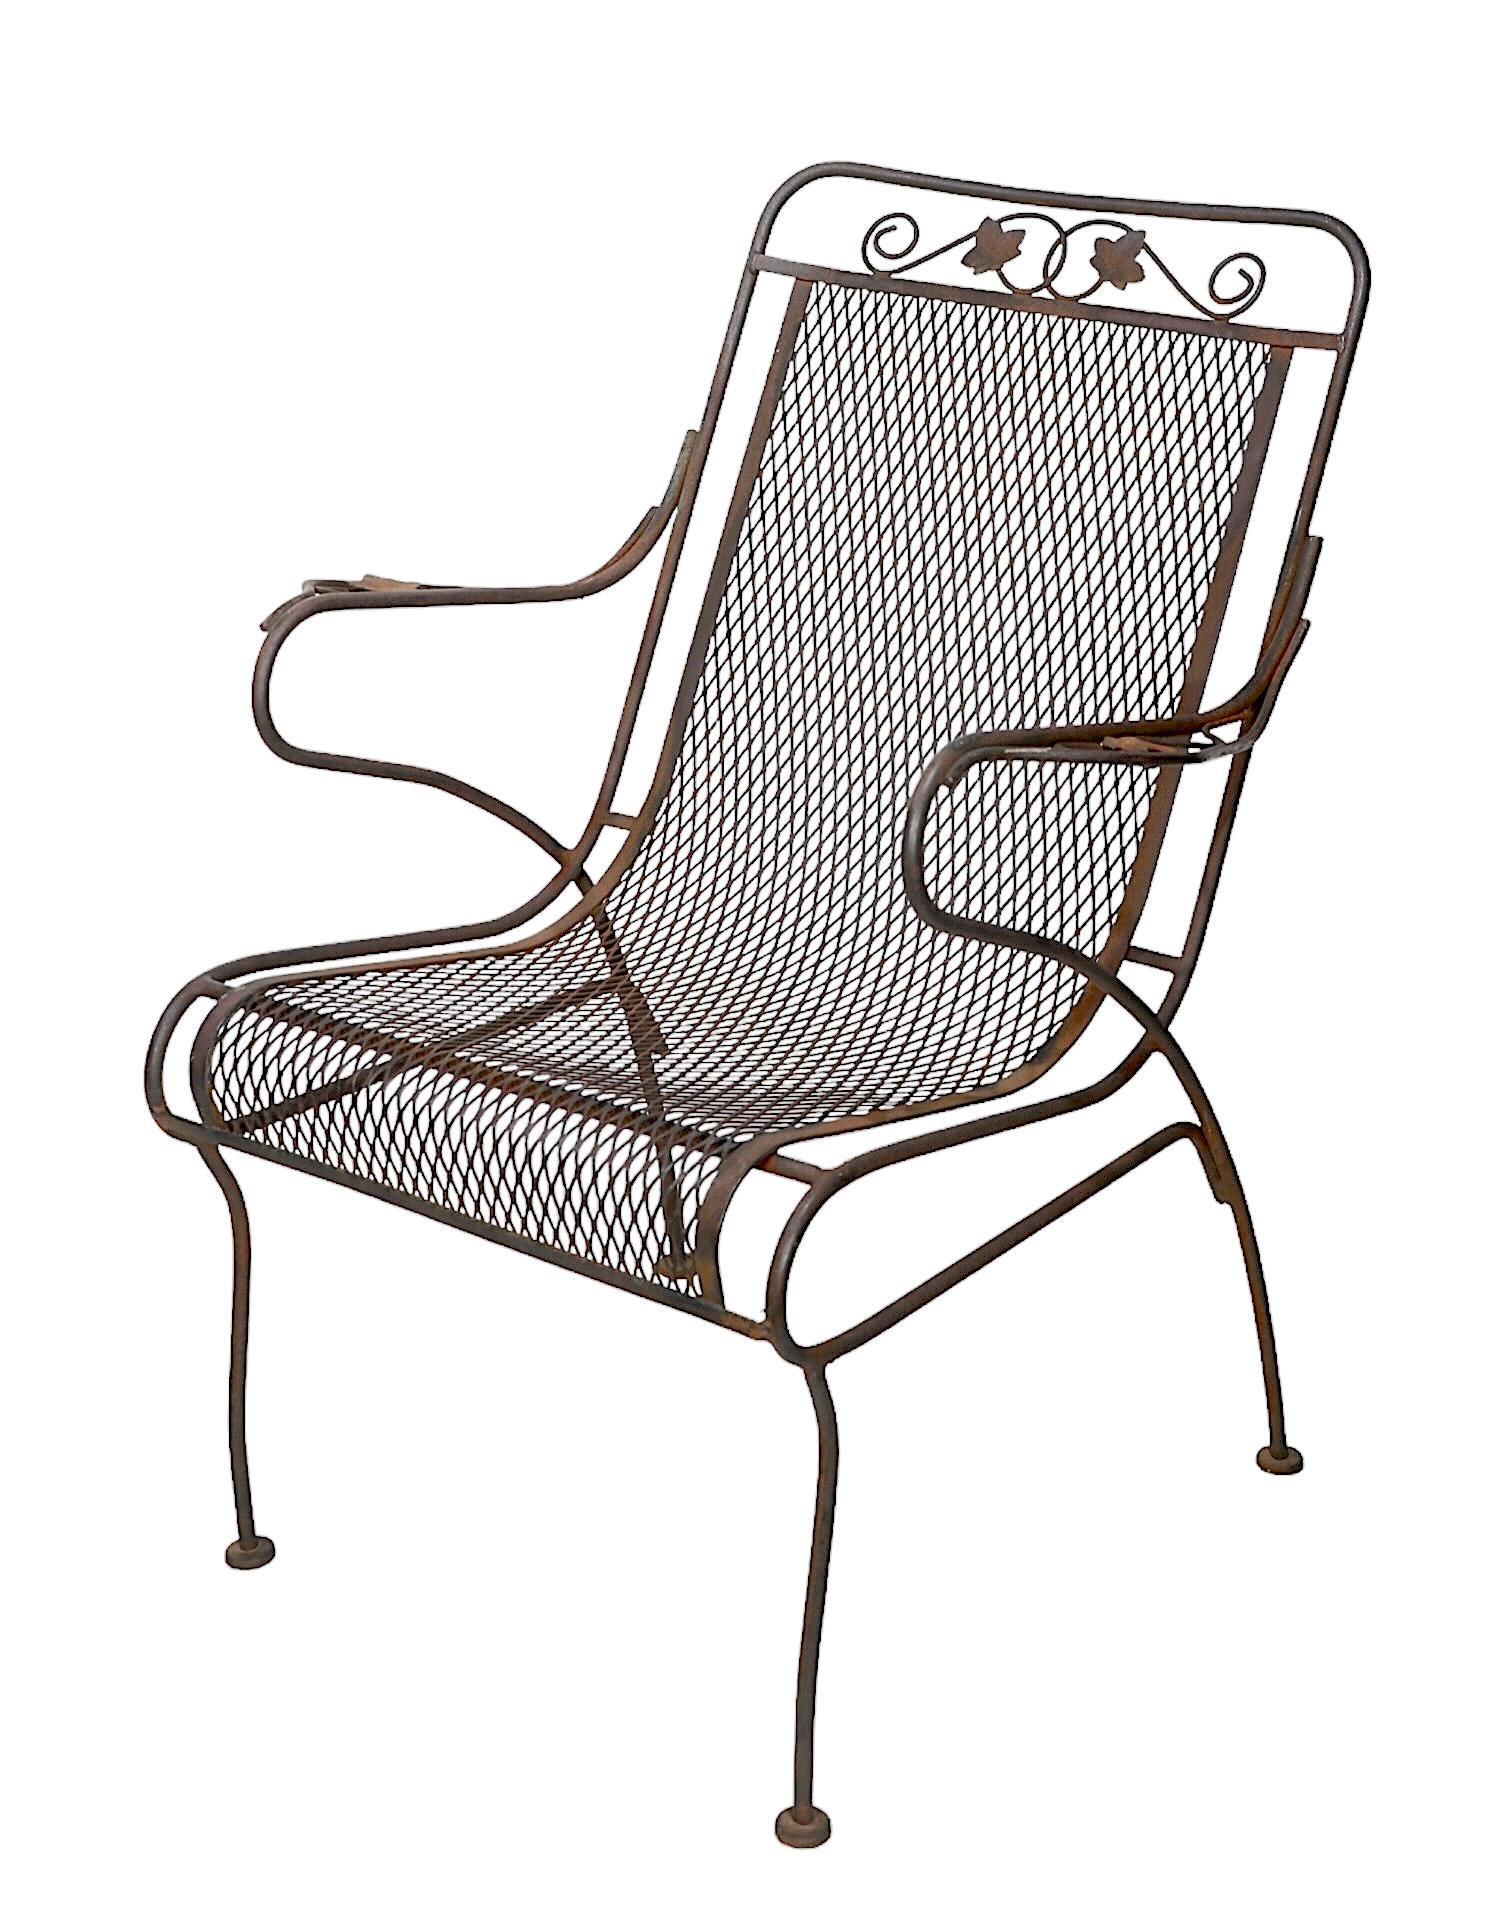 Classic vintage garden, patio, poolside high back arm, or lounge chair, in very good, original condition. 
The chair features a wrought iron frame with a continuous metal mesh seat and back rest. Attributed to Salterini, or possibly Woodard, circa